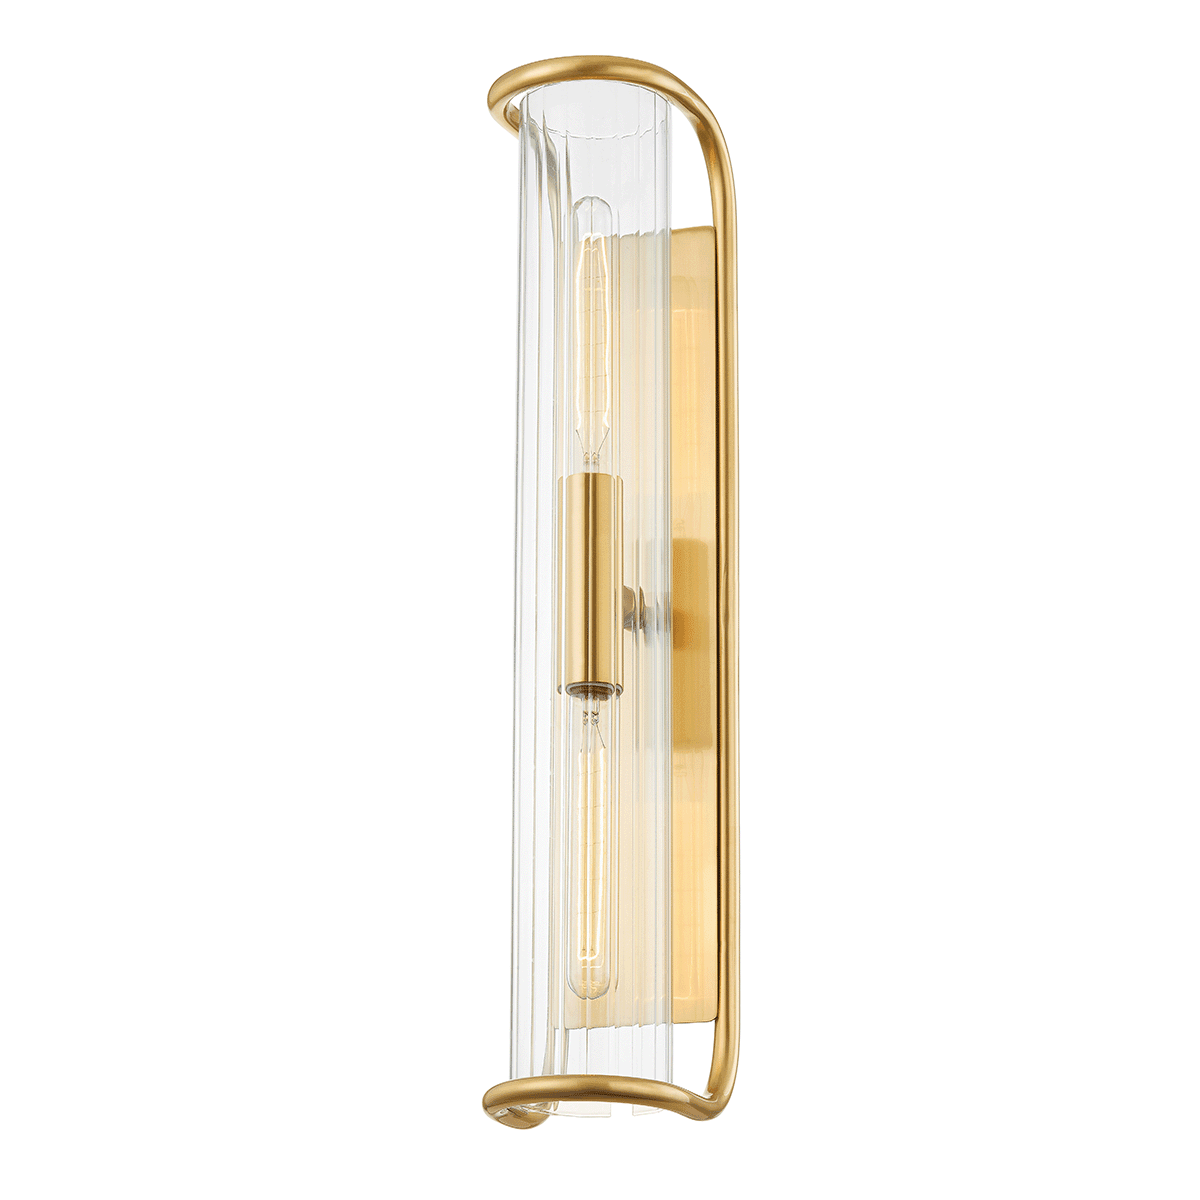 Hudson Valley Lighting - Fillmore Wall Sconce - 8926-AGB | Montreal Lighting & Hardware